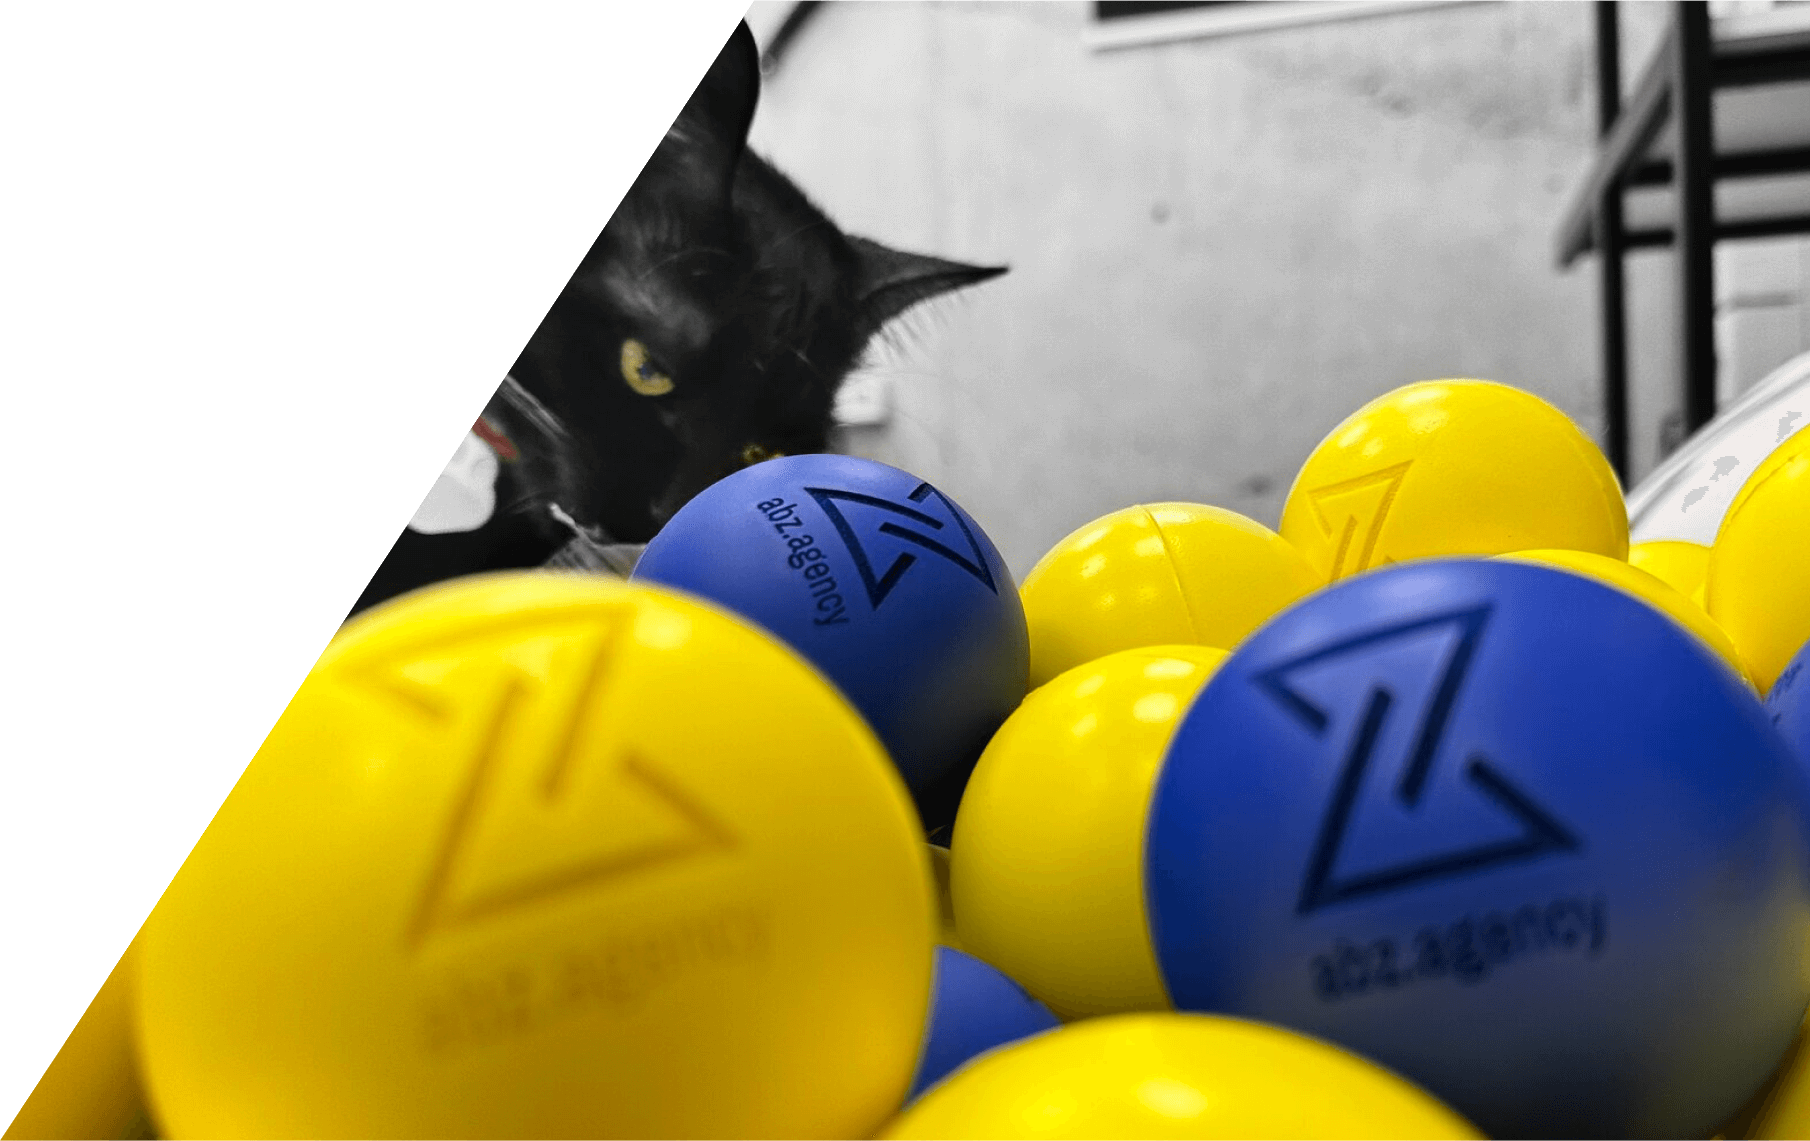 Balls of abz.agency® with a cat